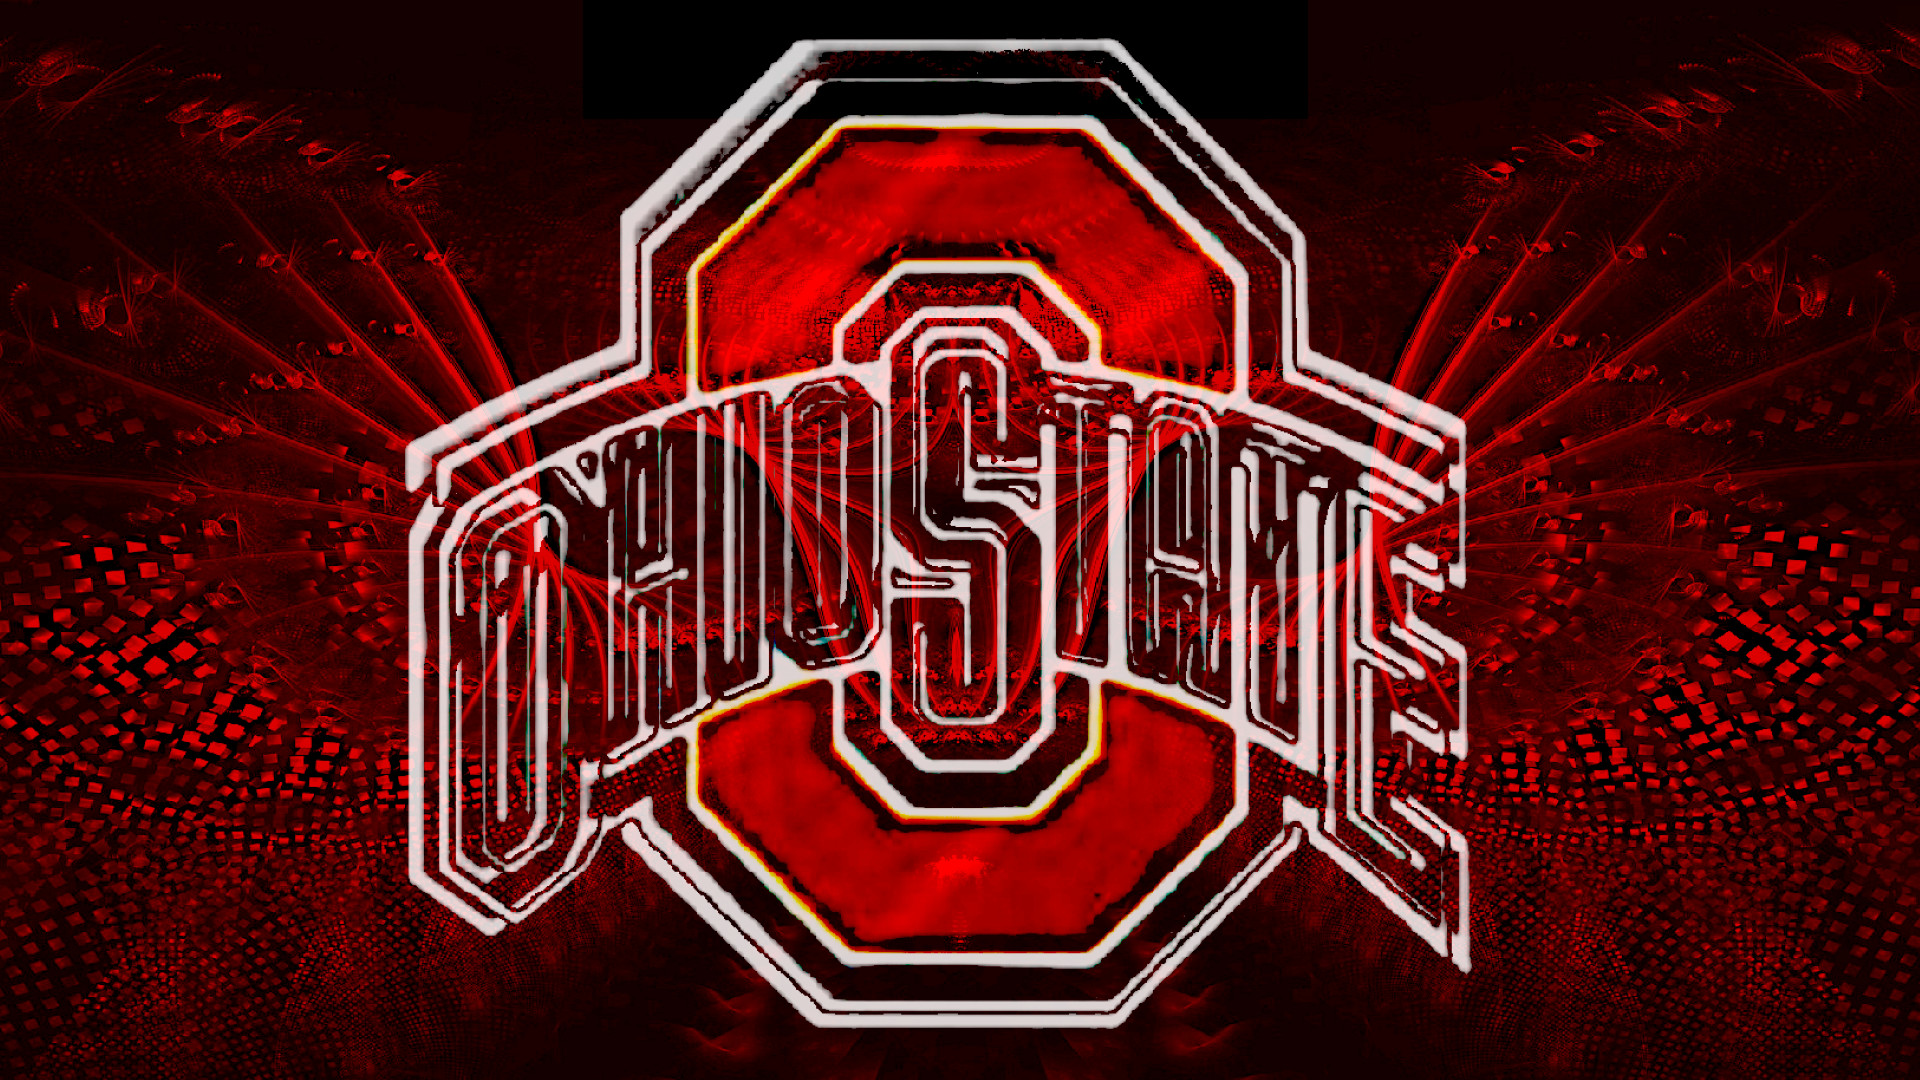 1920x1080 Celebrate The Game With Ohio State Michigan Wallpapers and | HD Wallpapers  | Pinterest | Hd wallpaper and Wallpaper